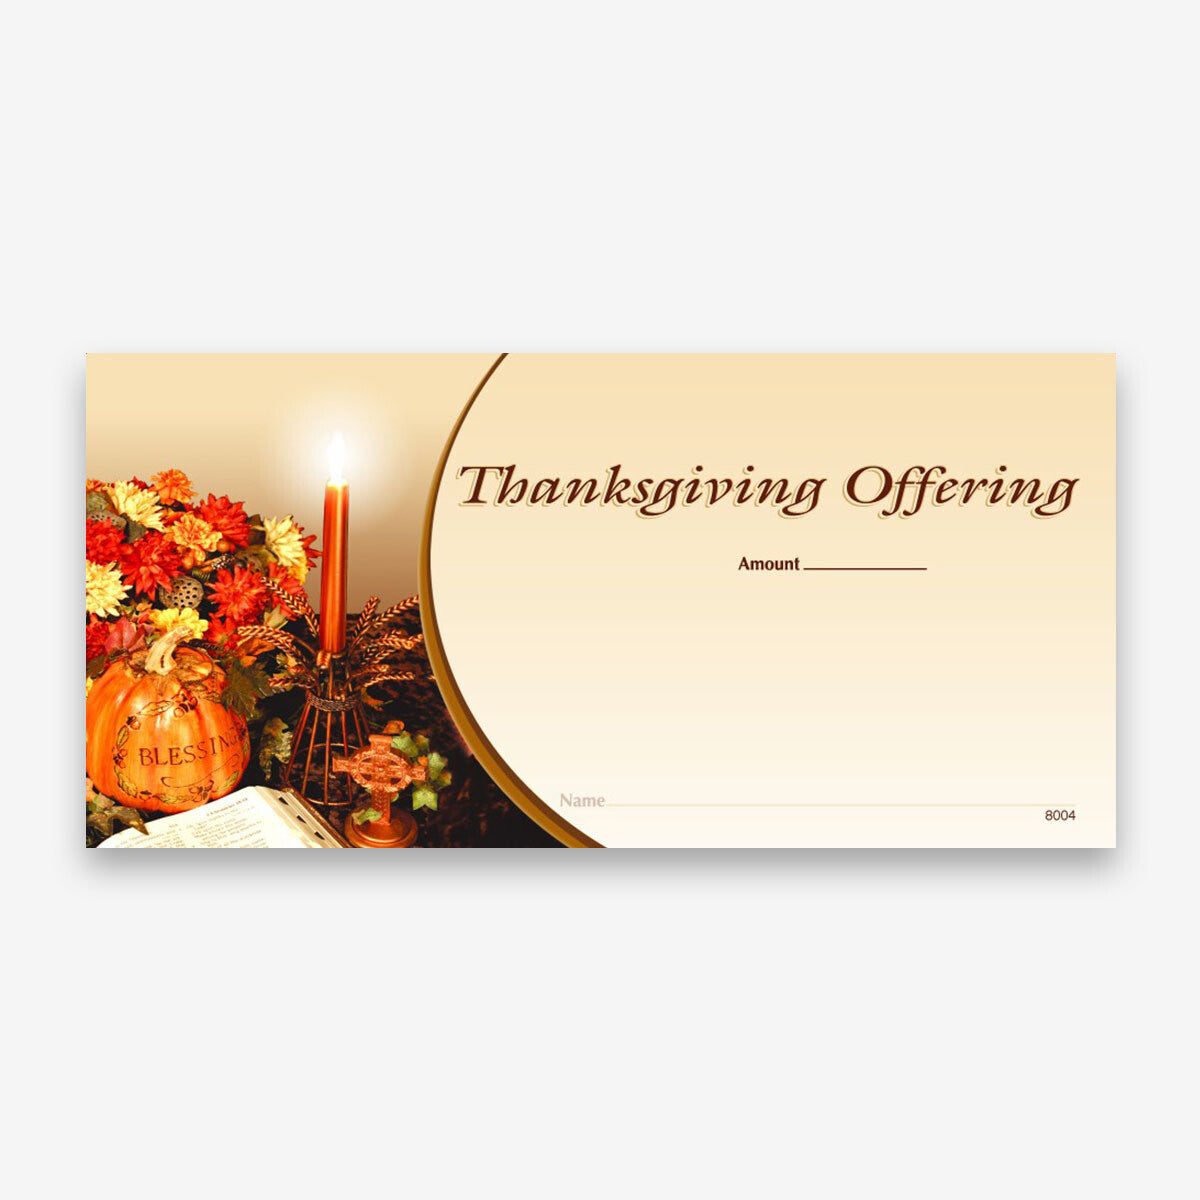 NCS National Church Solutions Premium Thanksgiving Offering Envelope